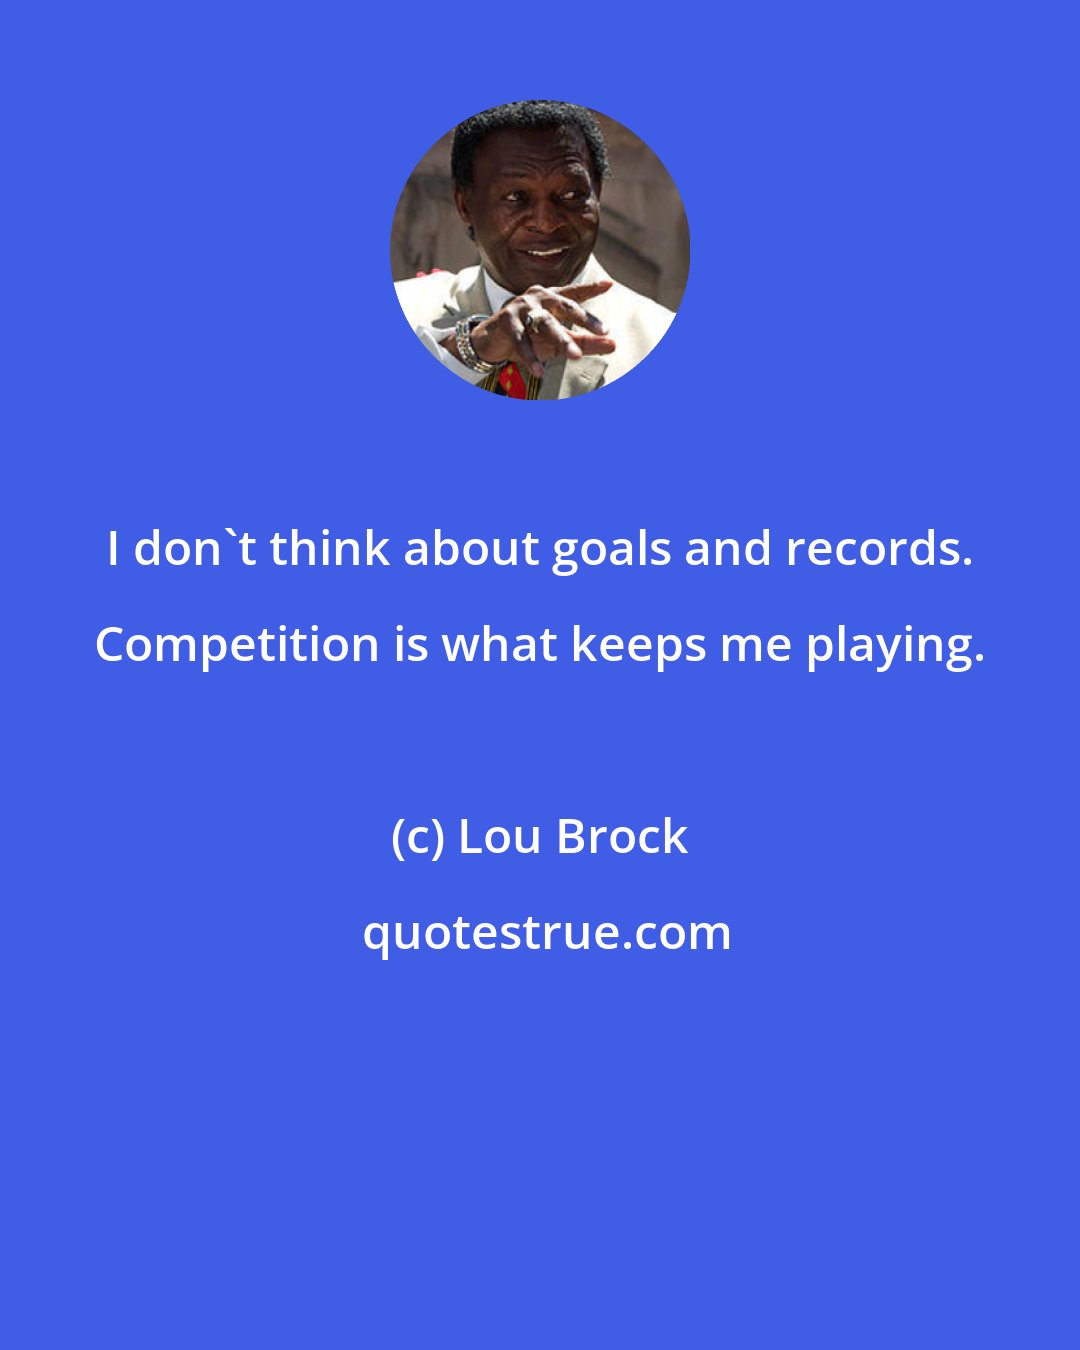 Lou Brock: I don't think about goals and records. Competition is what keeps me playing.